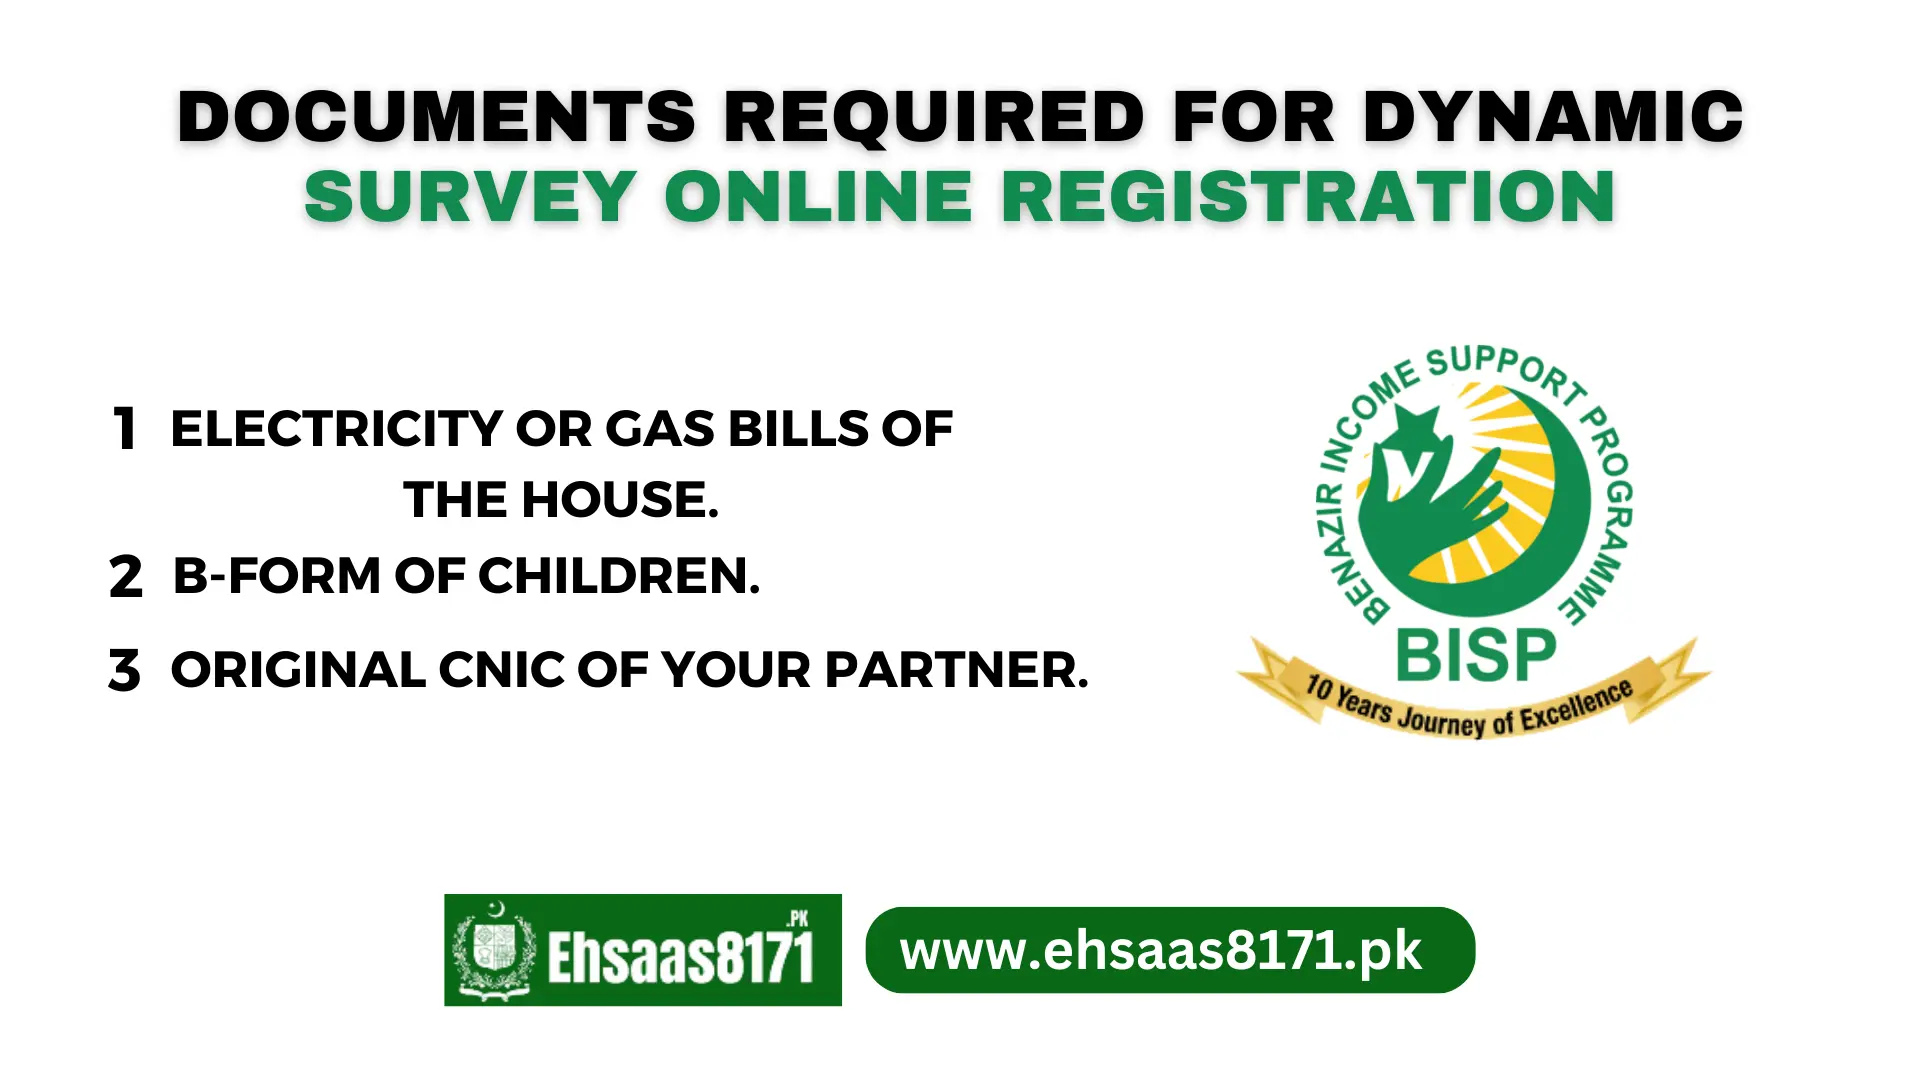 Documents required for Dynamic Survey Online Registration